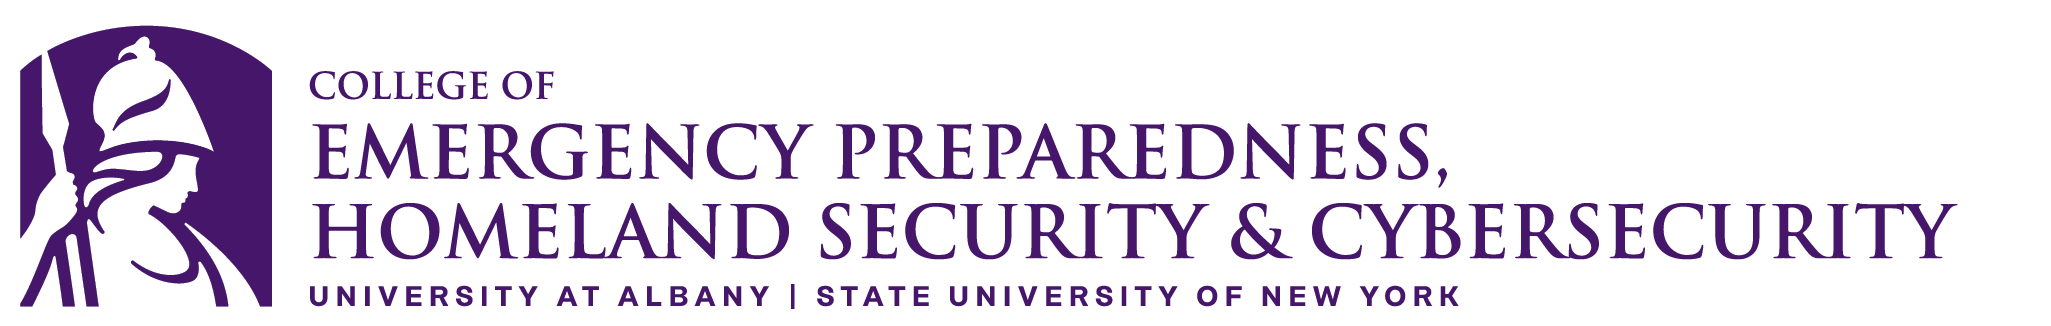 College of Emergency Preparedness, Homeland Security and Cybersecurity, University at Albany, State University of New York logo